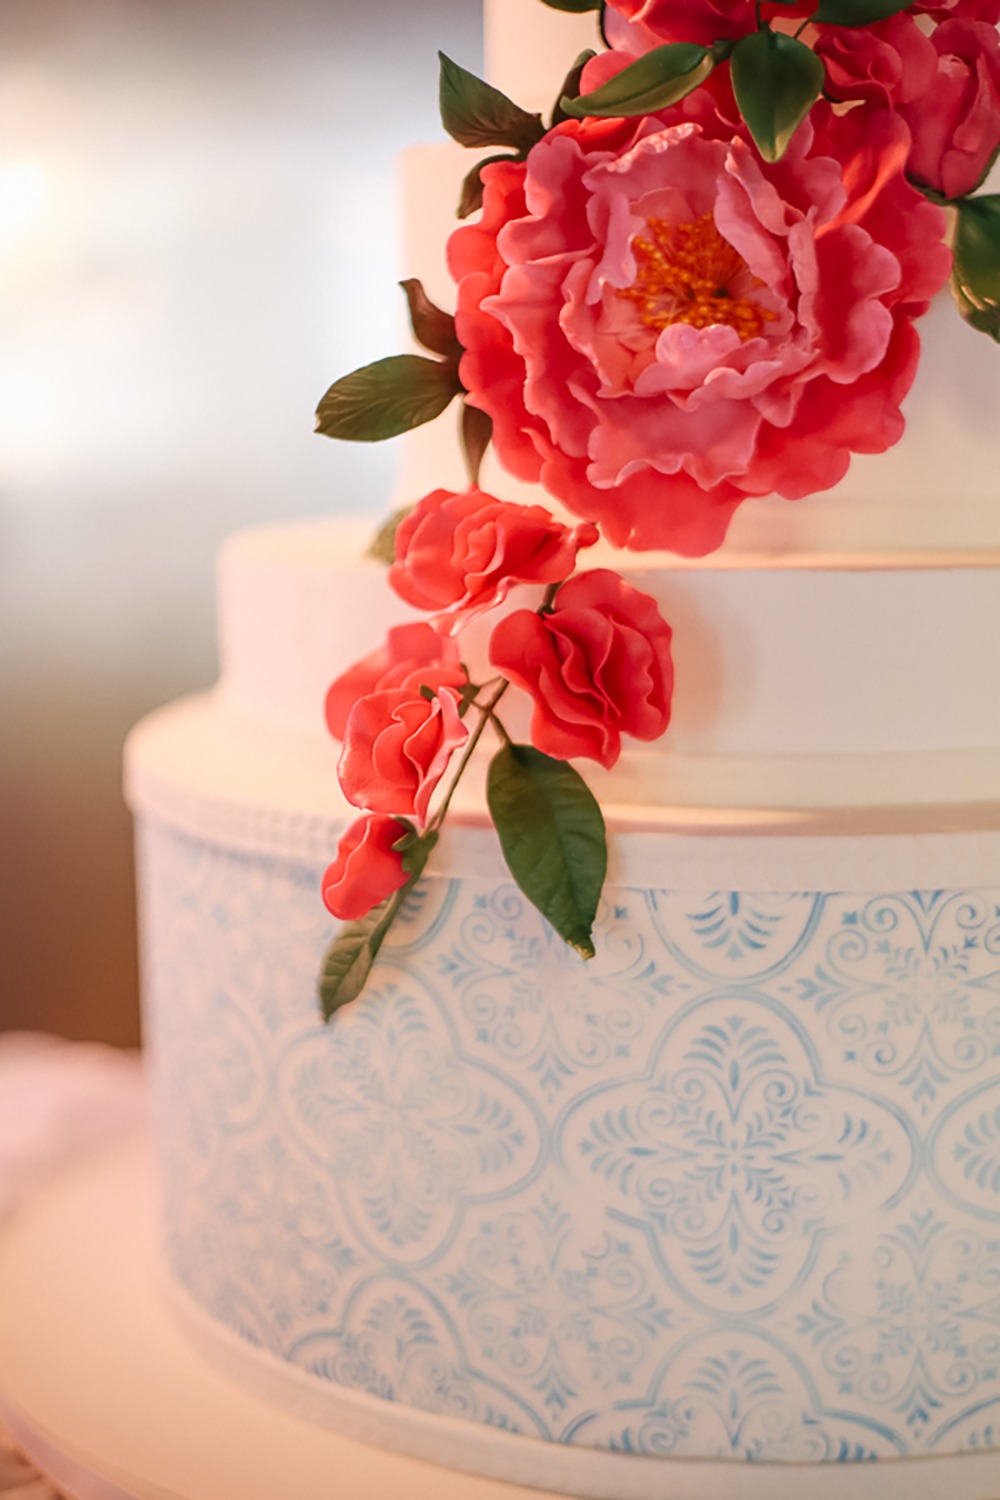 stamped wedding cake with flower accents